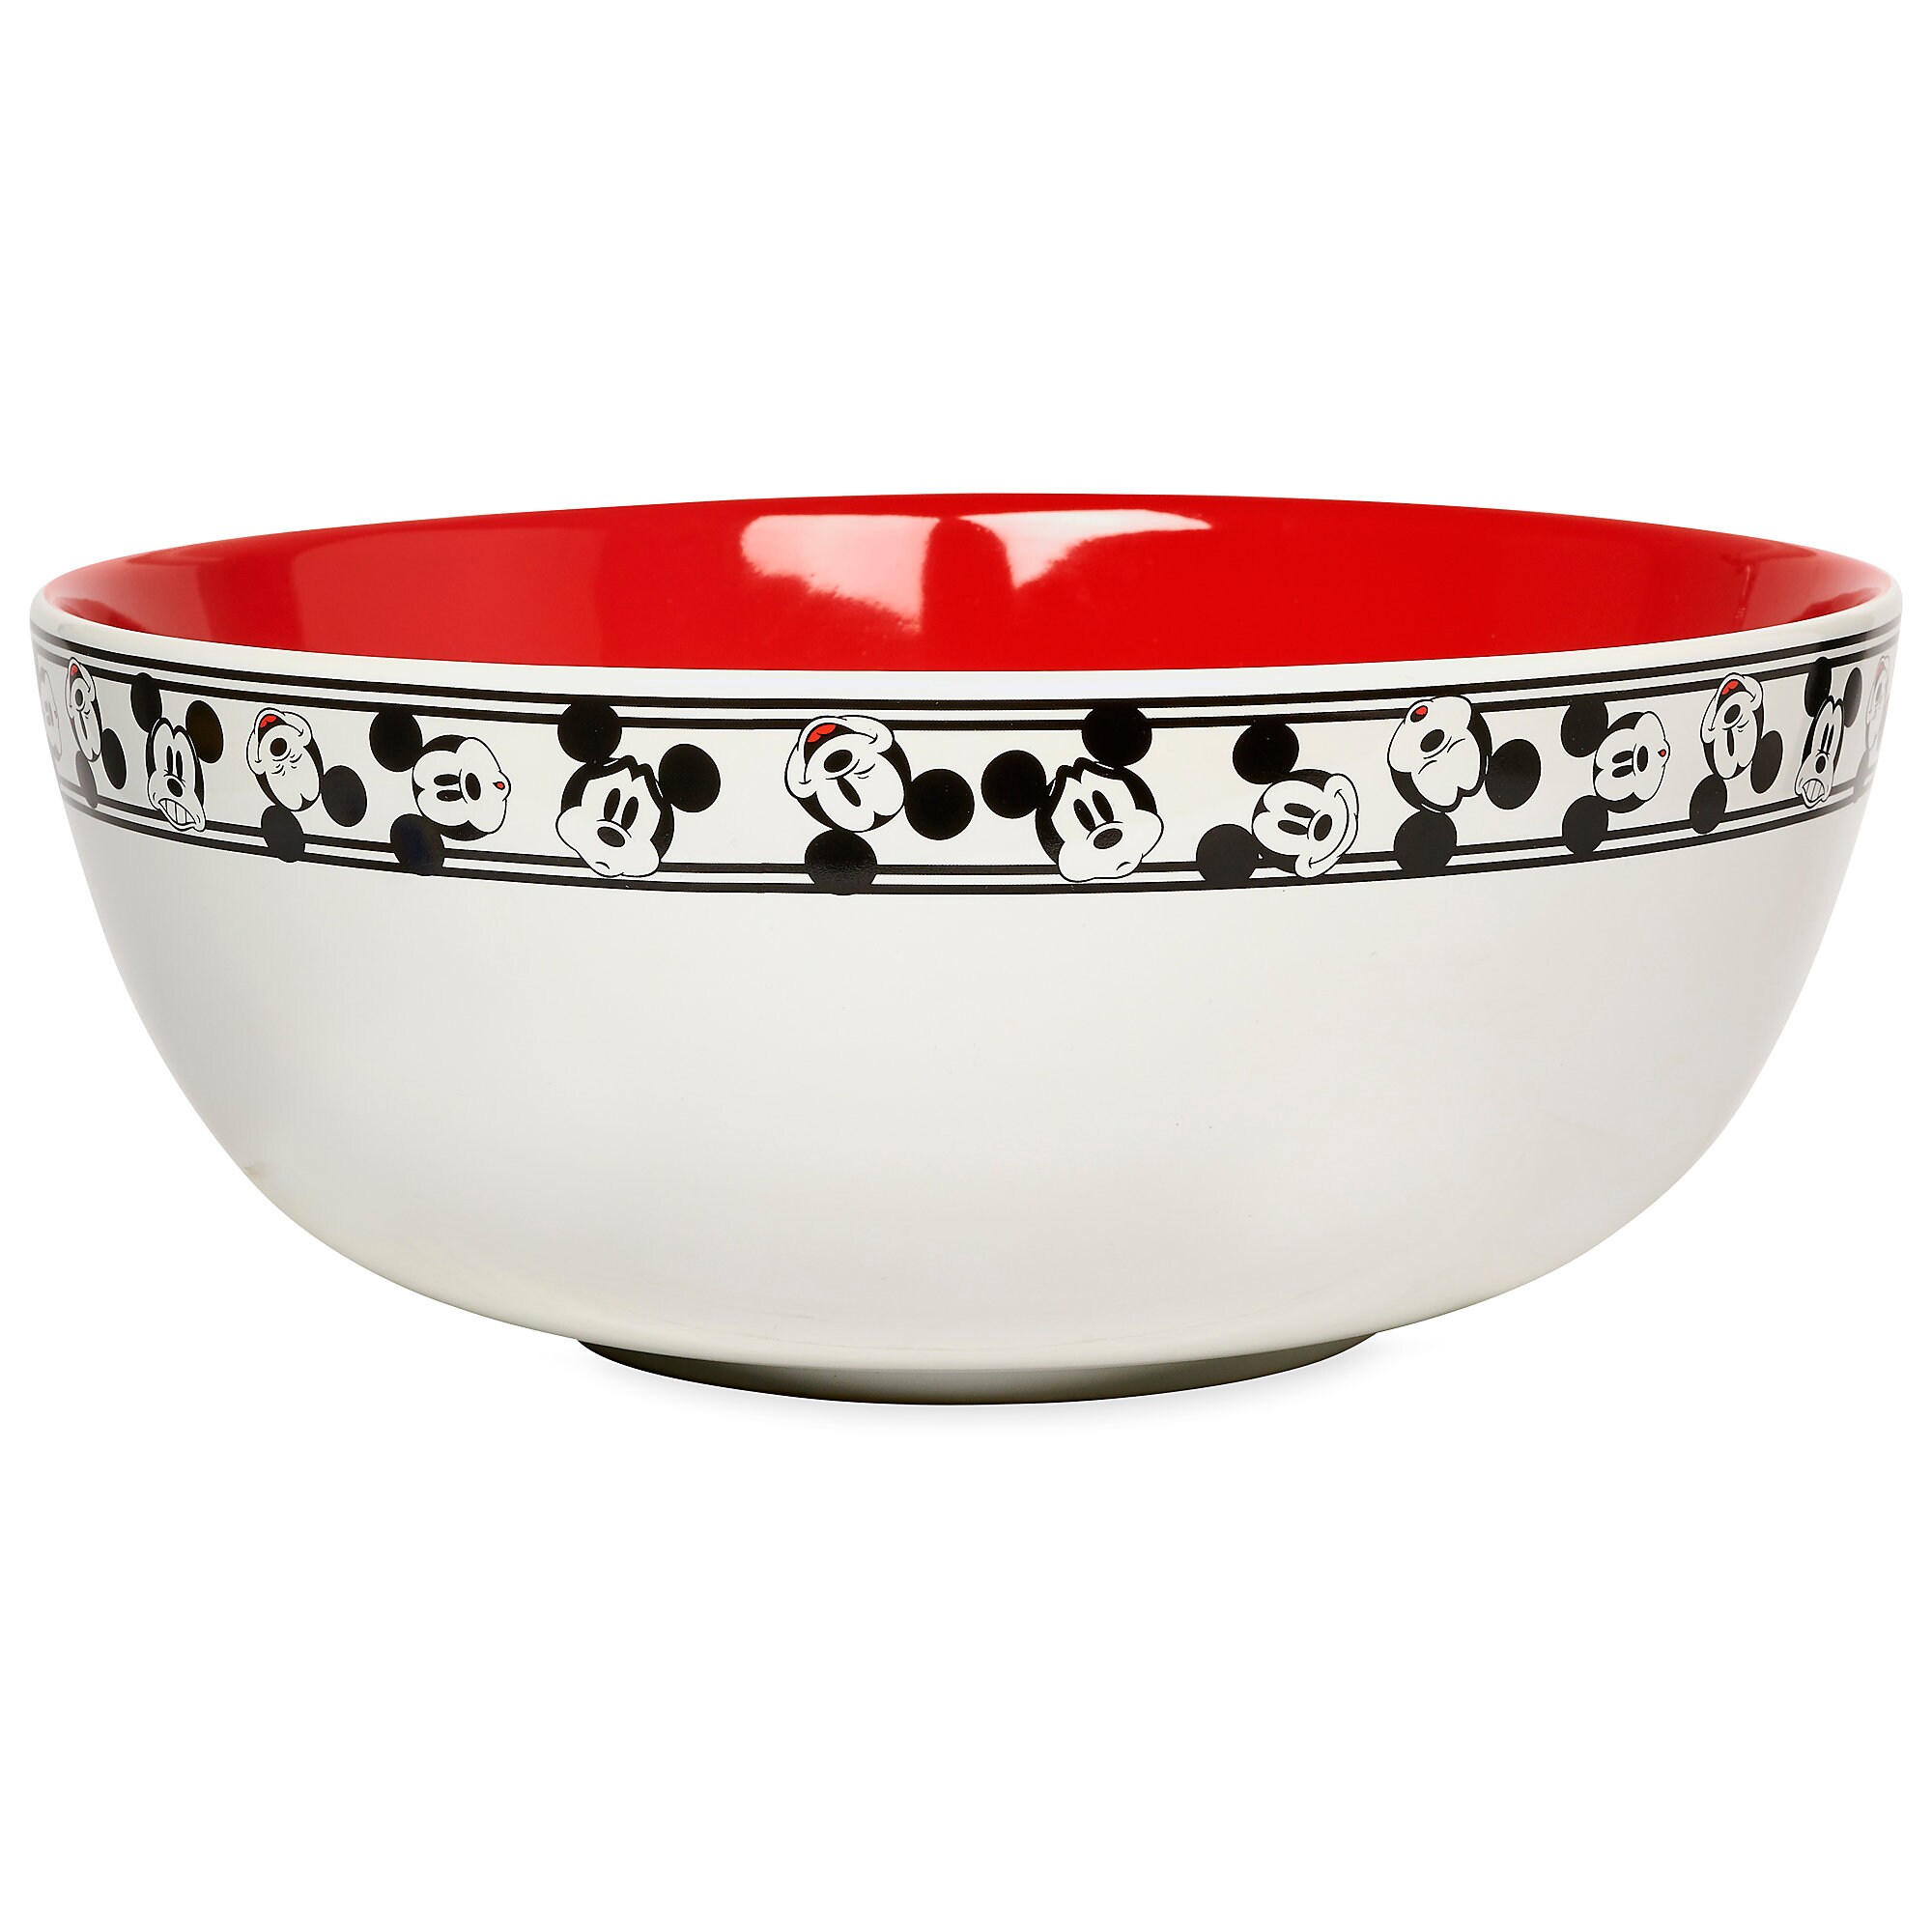 Mickey Mouse Serving Bowl - Disney Eats was released today – Dis